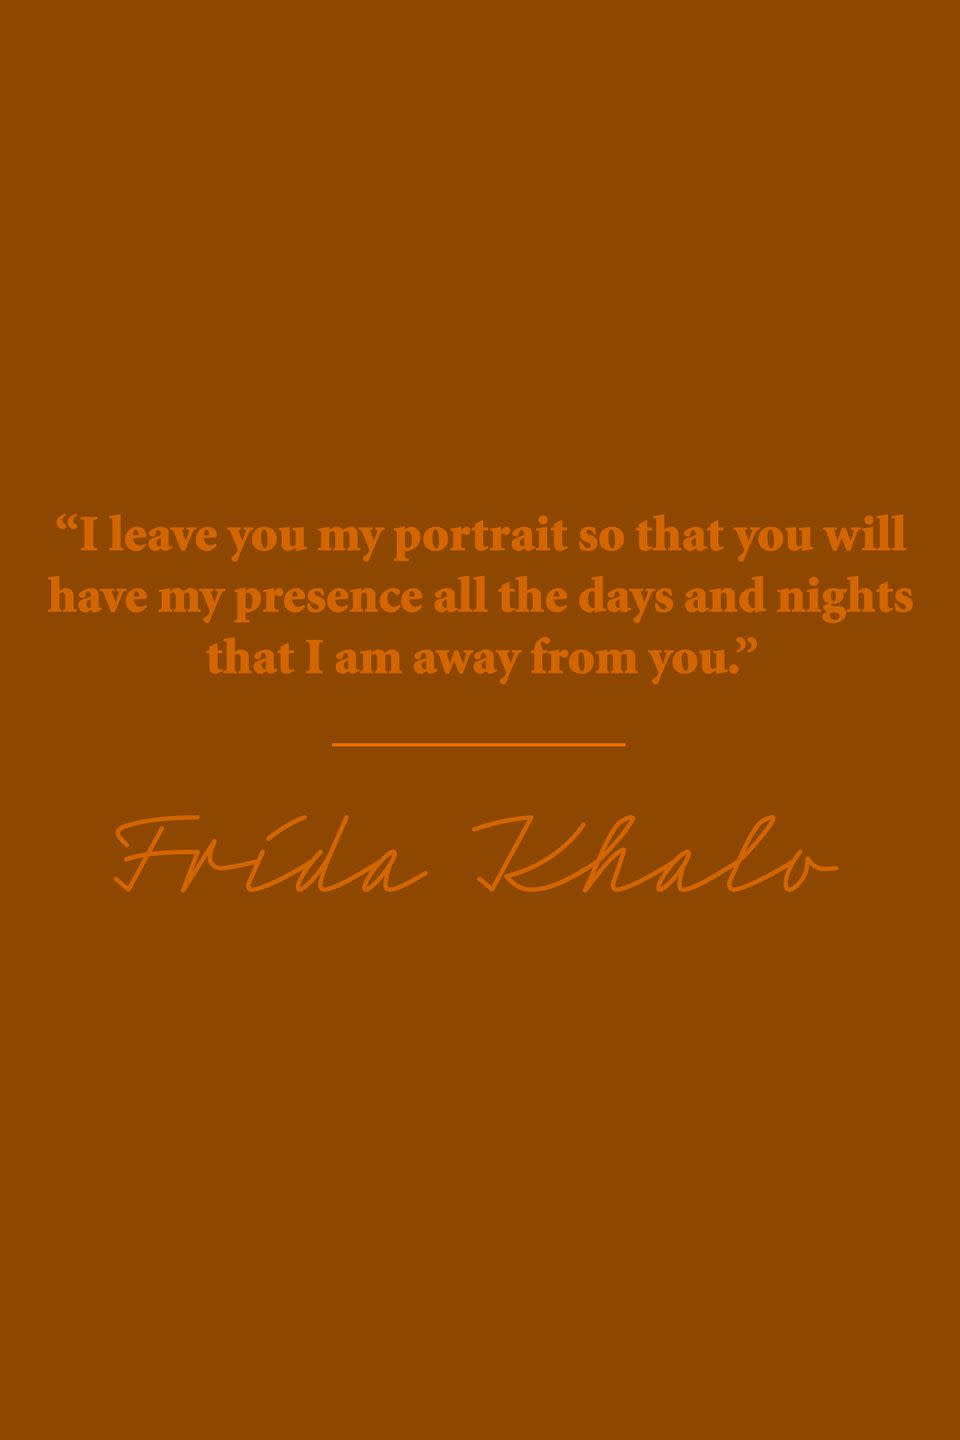 These Frida Kahlo Quotes Are as Evocative as Her Paintings